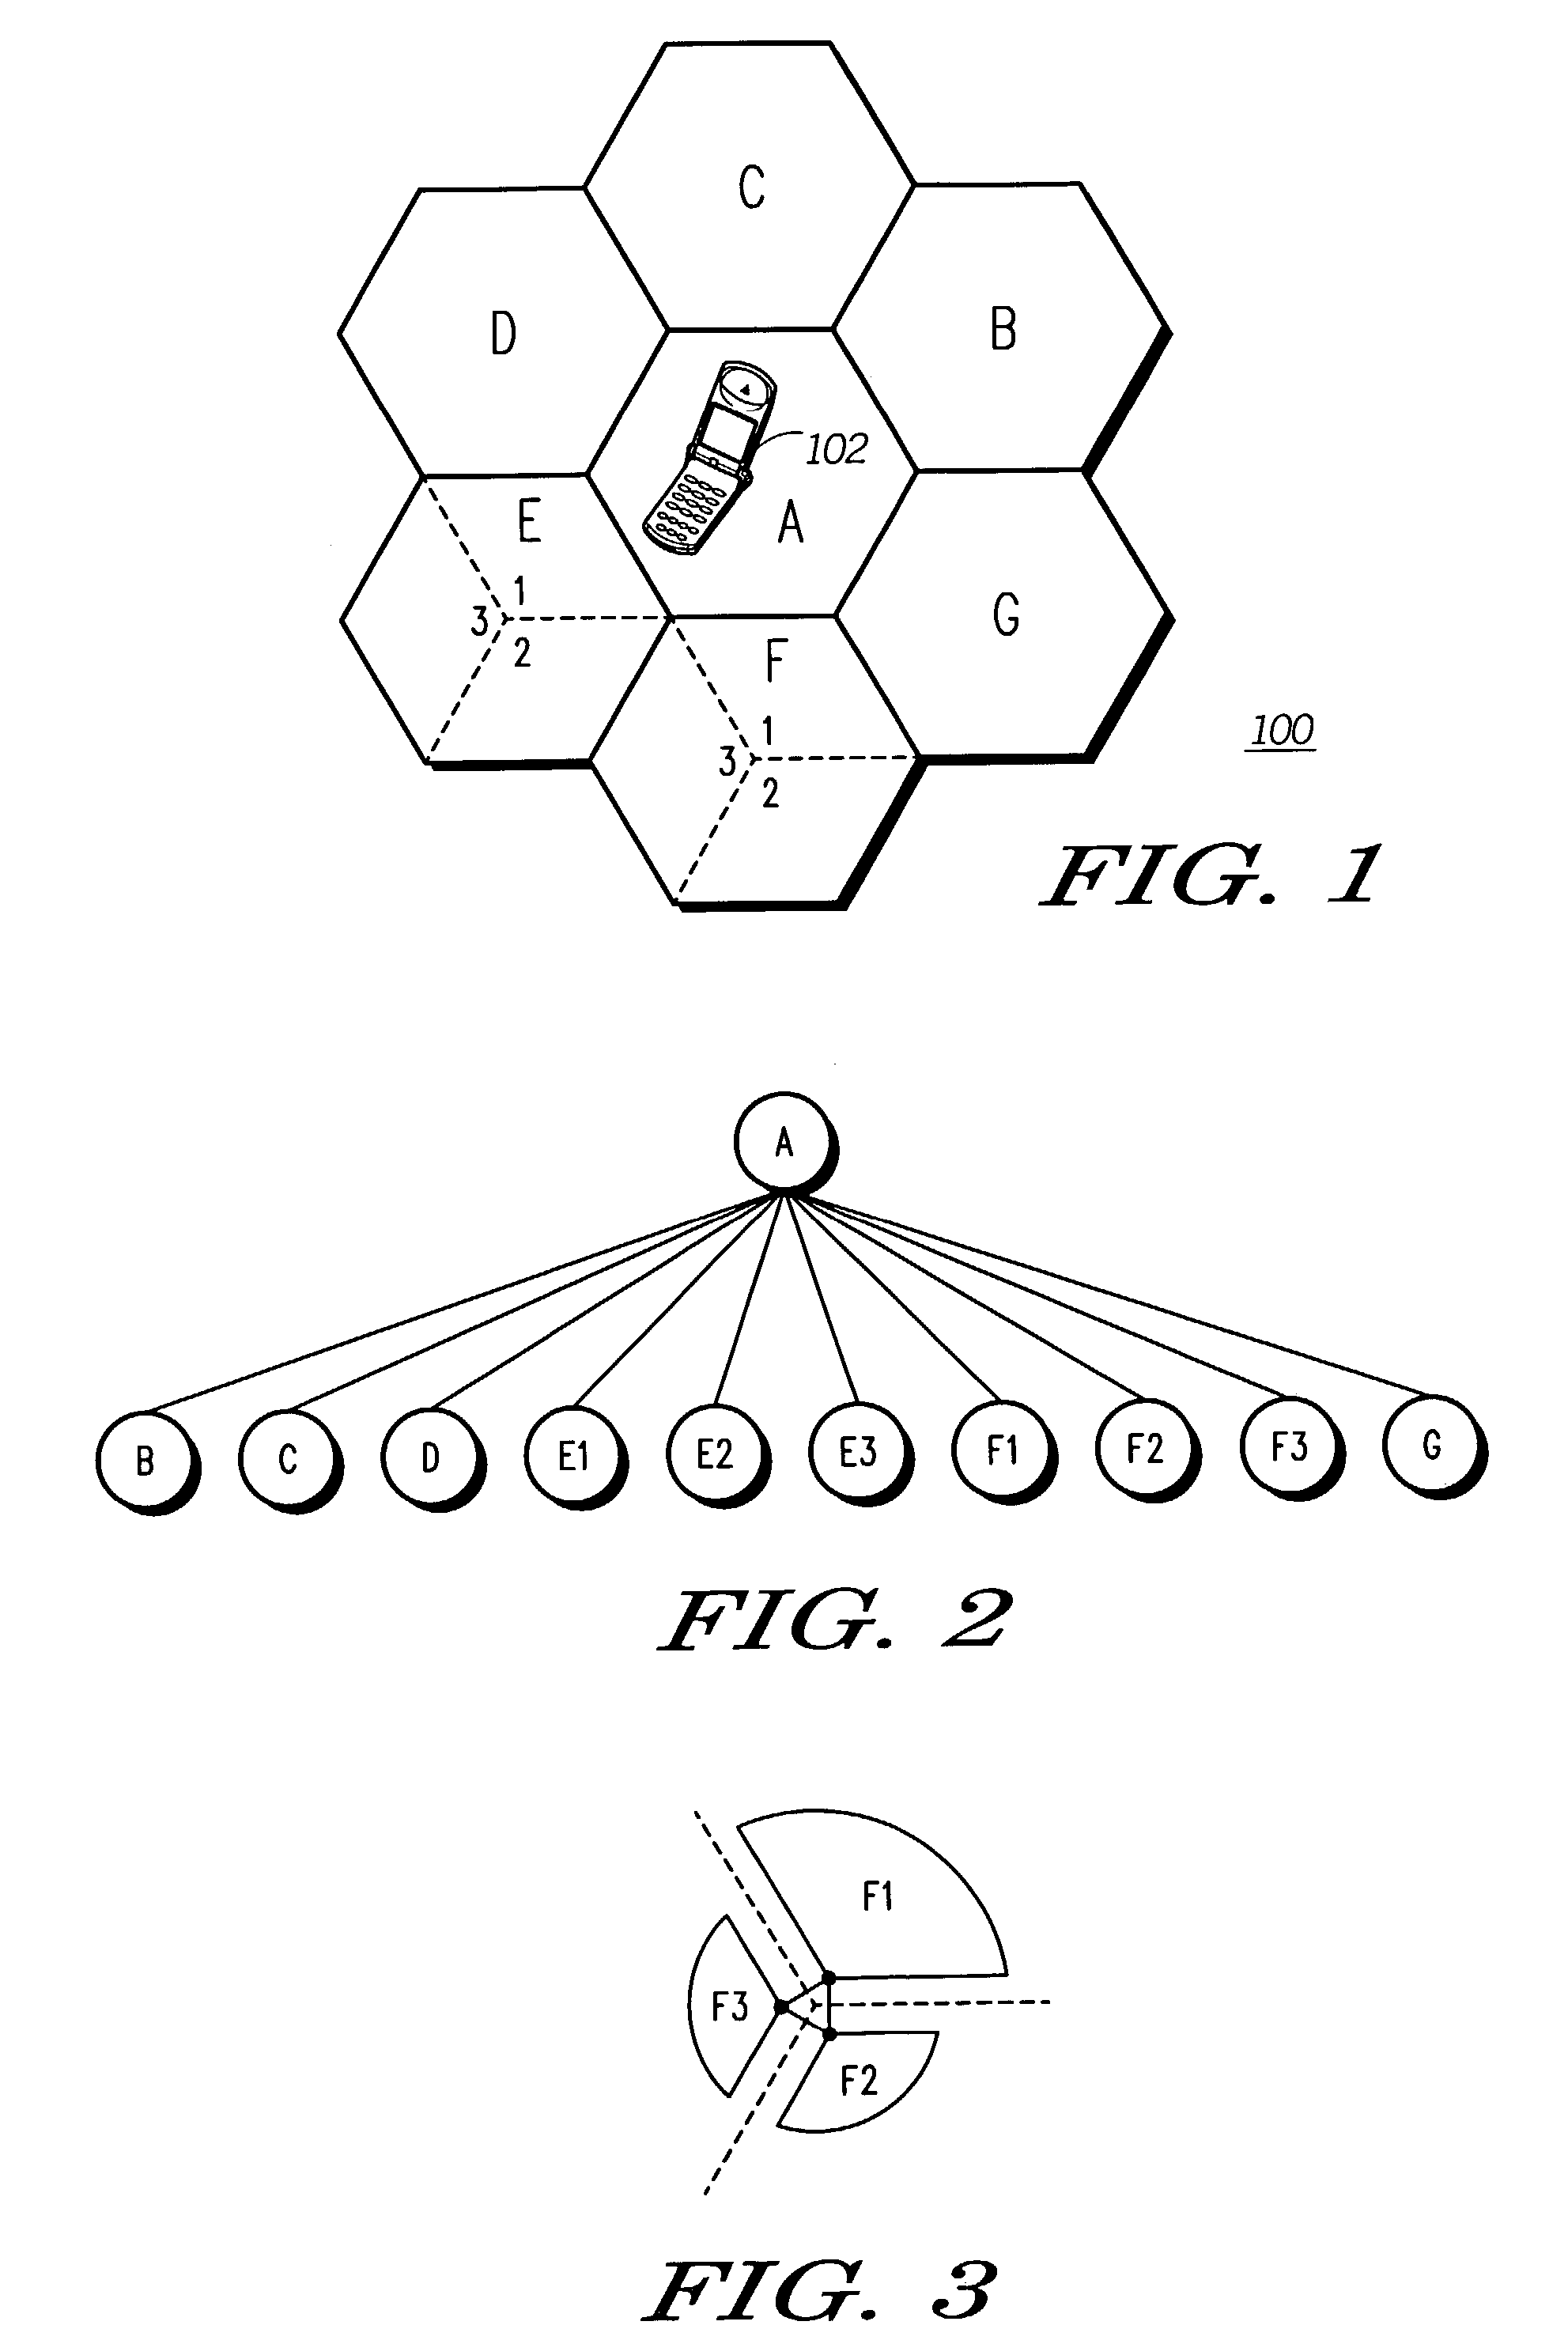 Method of determining co-location of cell sites and reducing ping-pong effect between cell sites